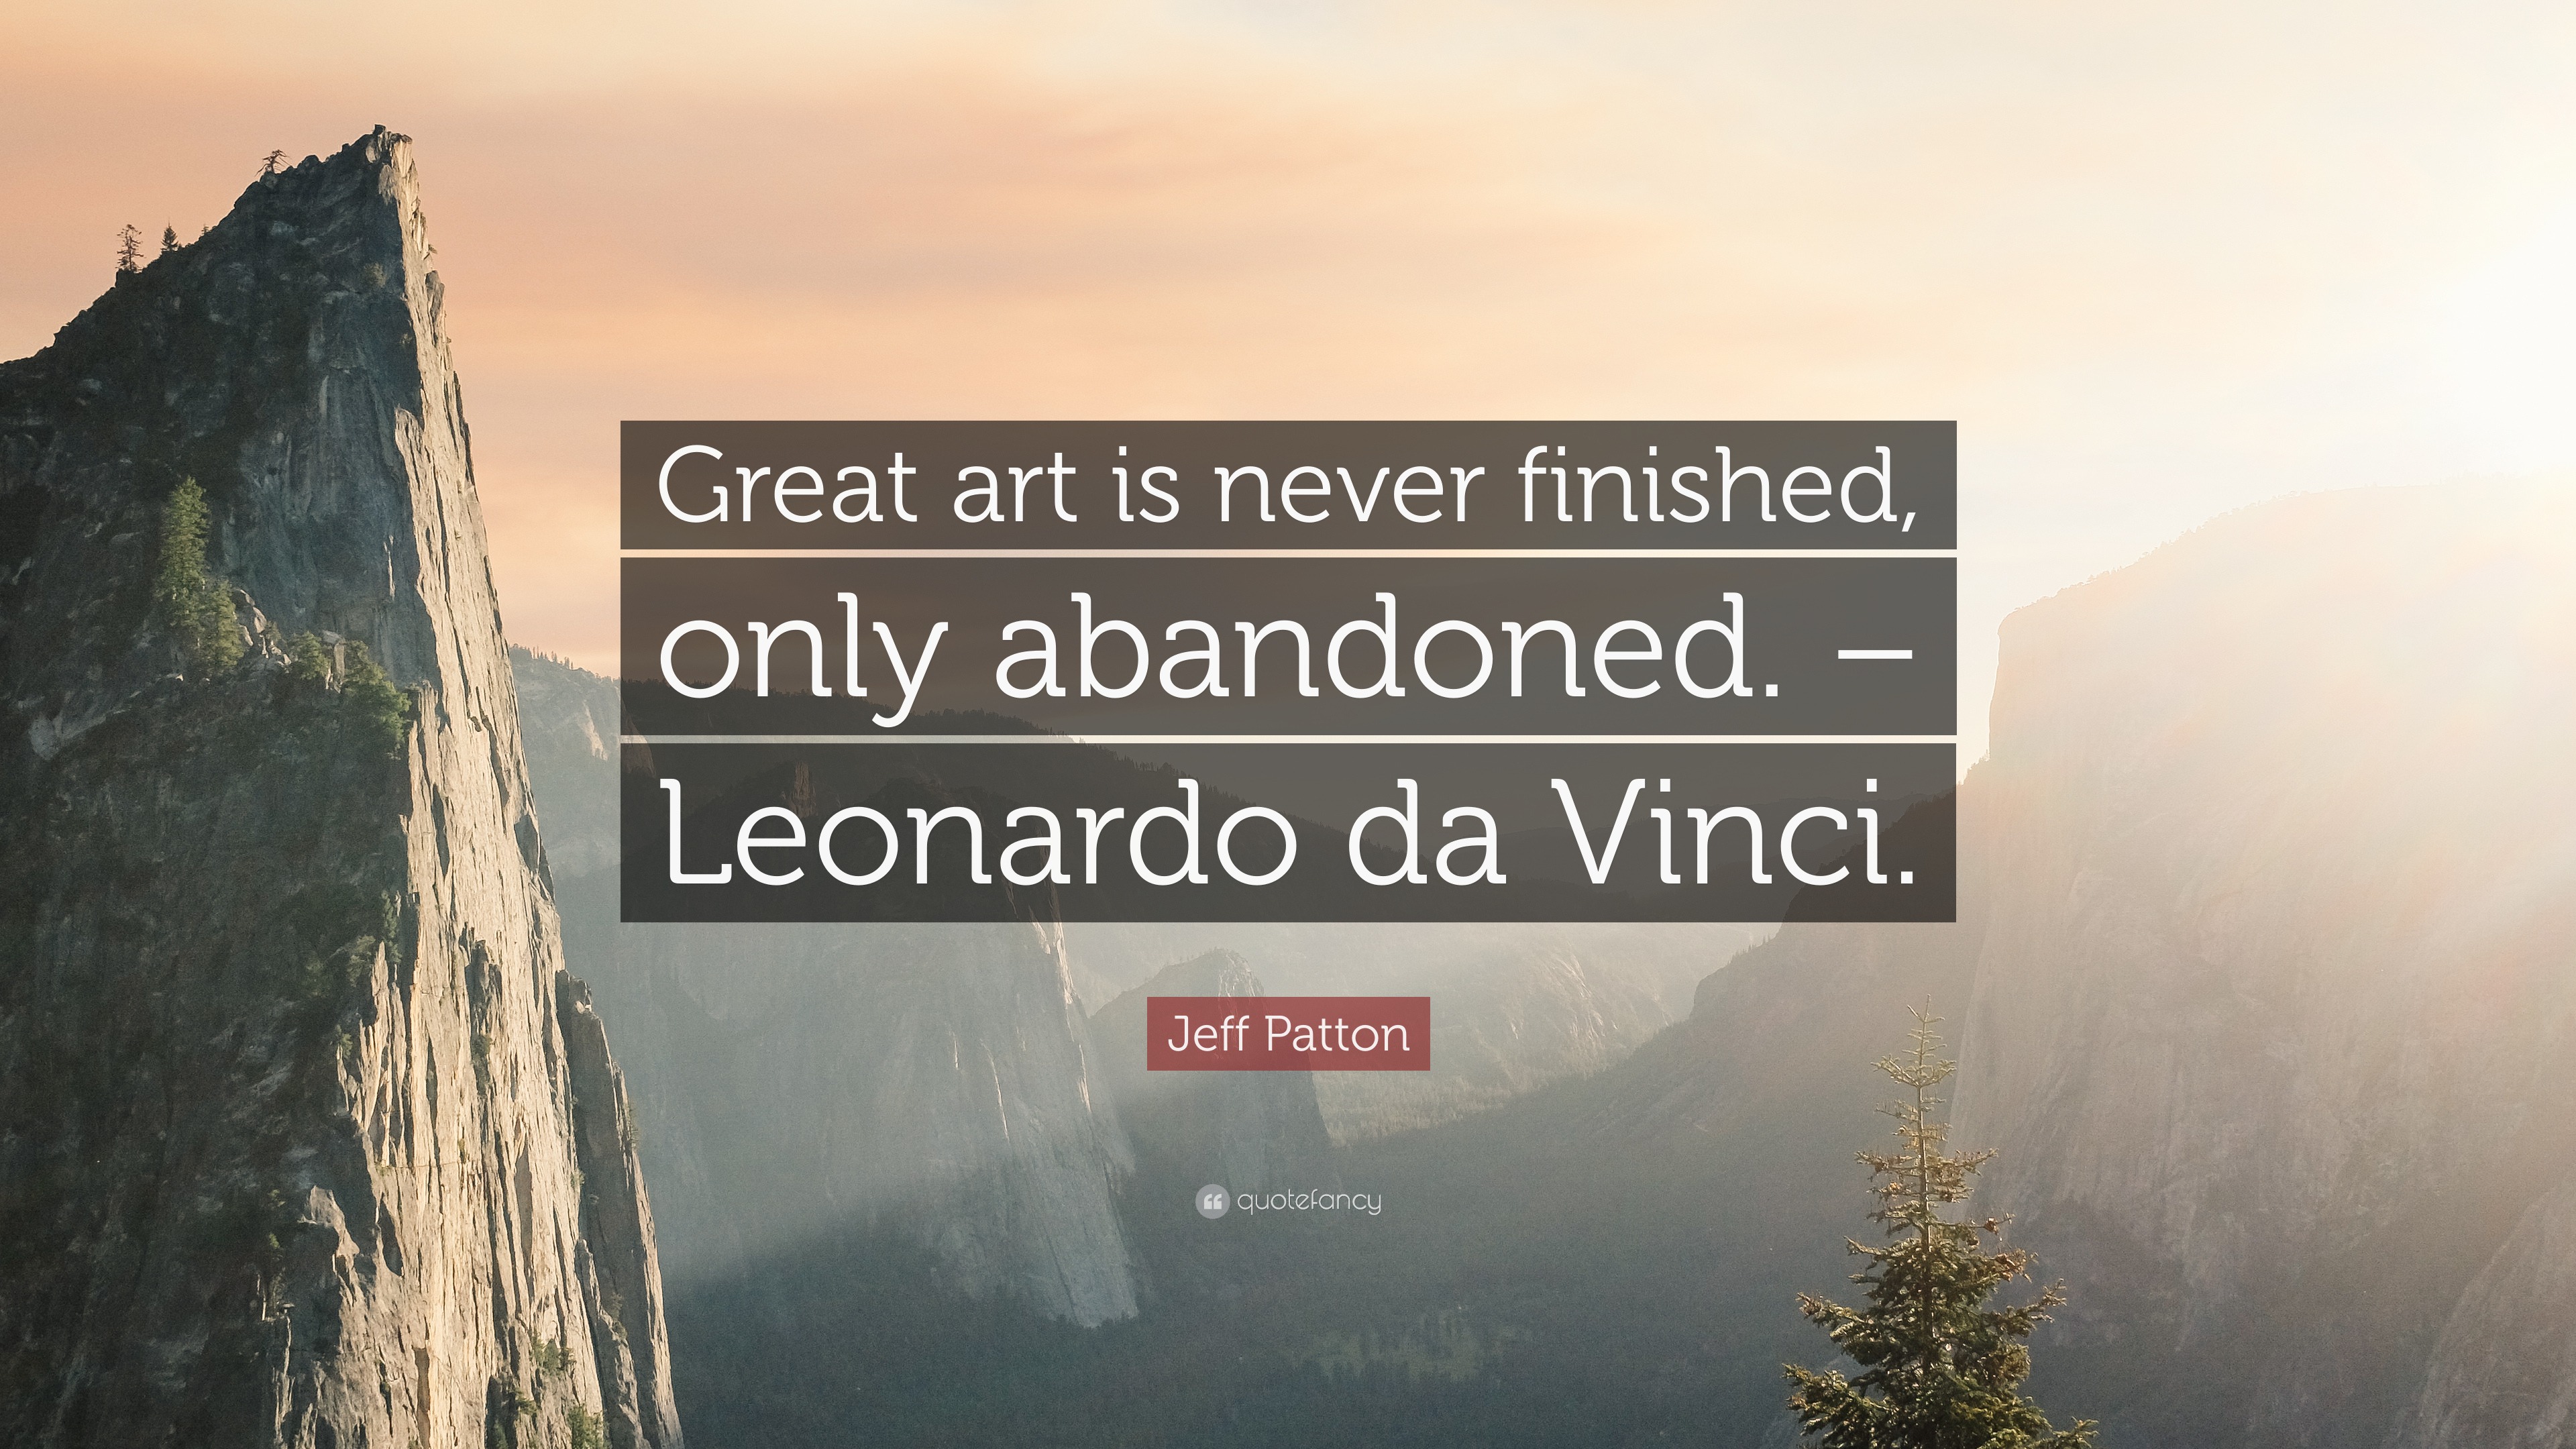 Jeff Patton Quote: “Great art is never finished, only abandoned ...